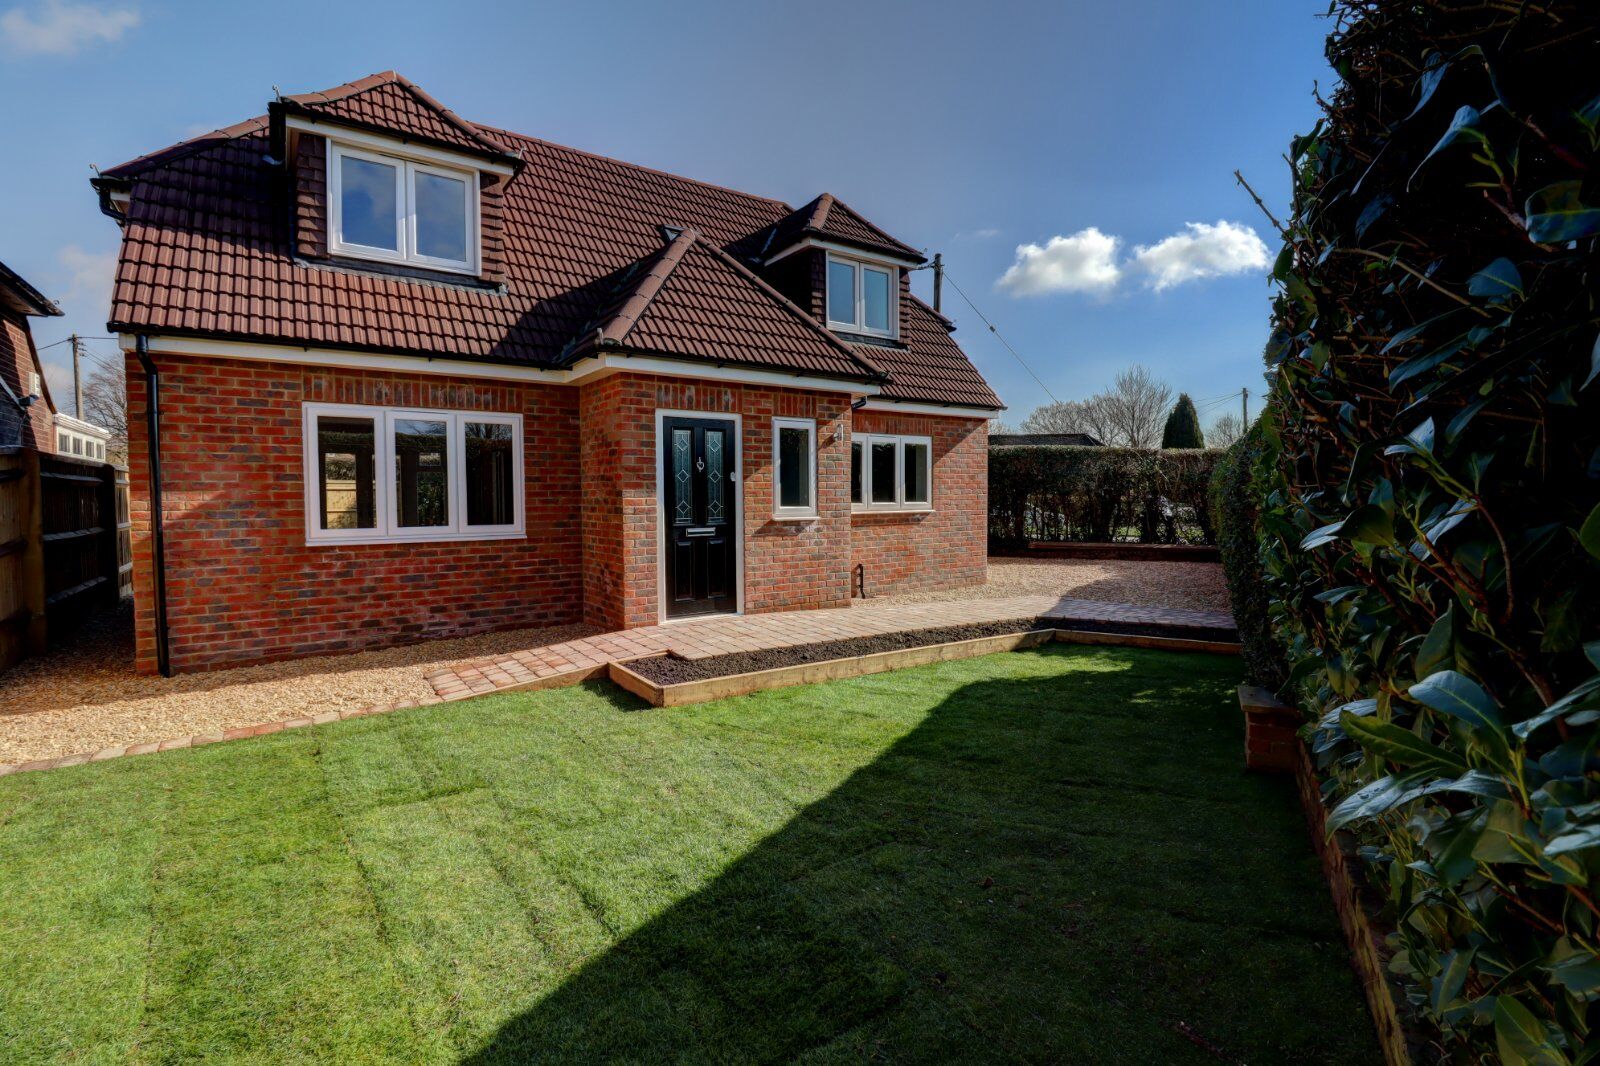 2 bedroom detached house for sale Marlow Road, Stokenchurch, HP14, main image